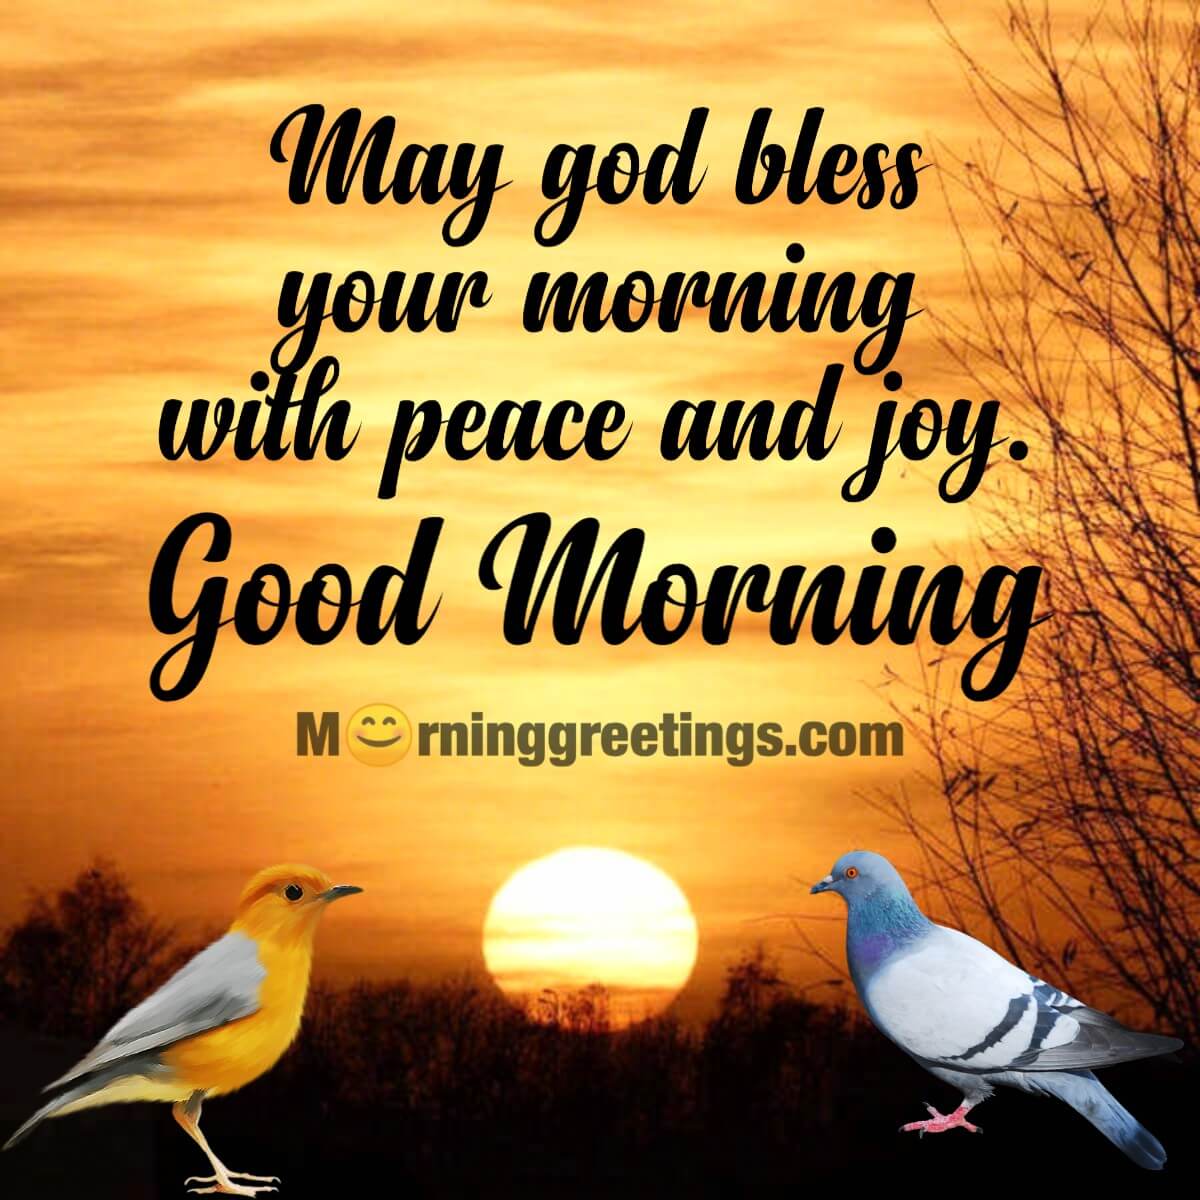 Good Morning God Bless You Images Wallpapers